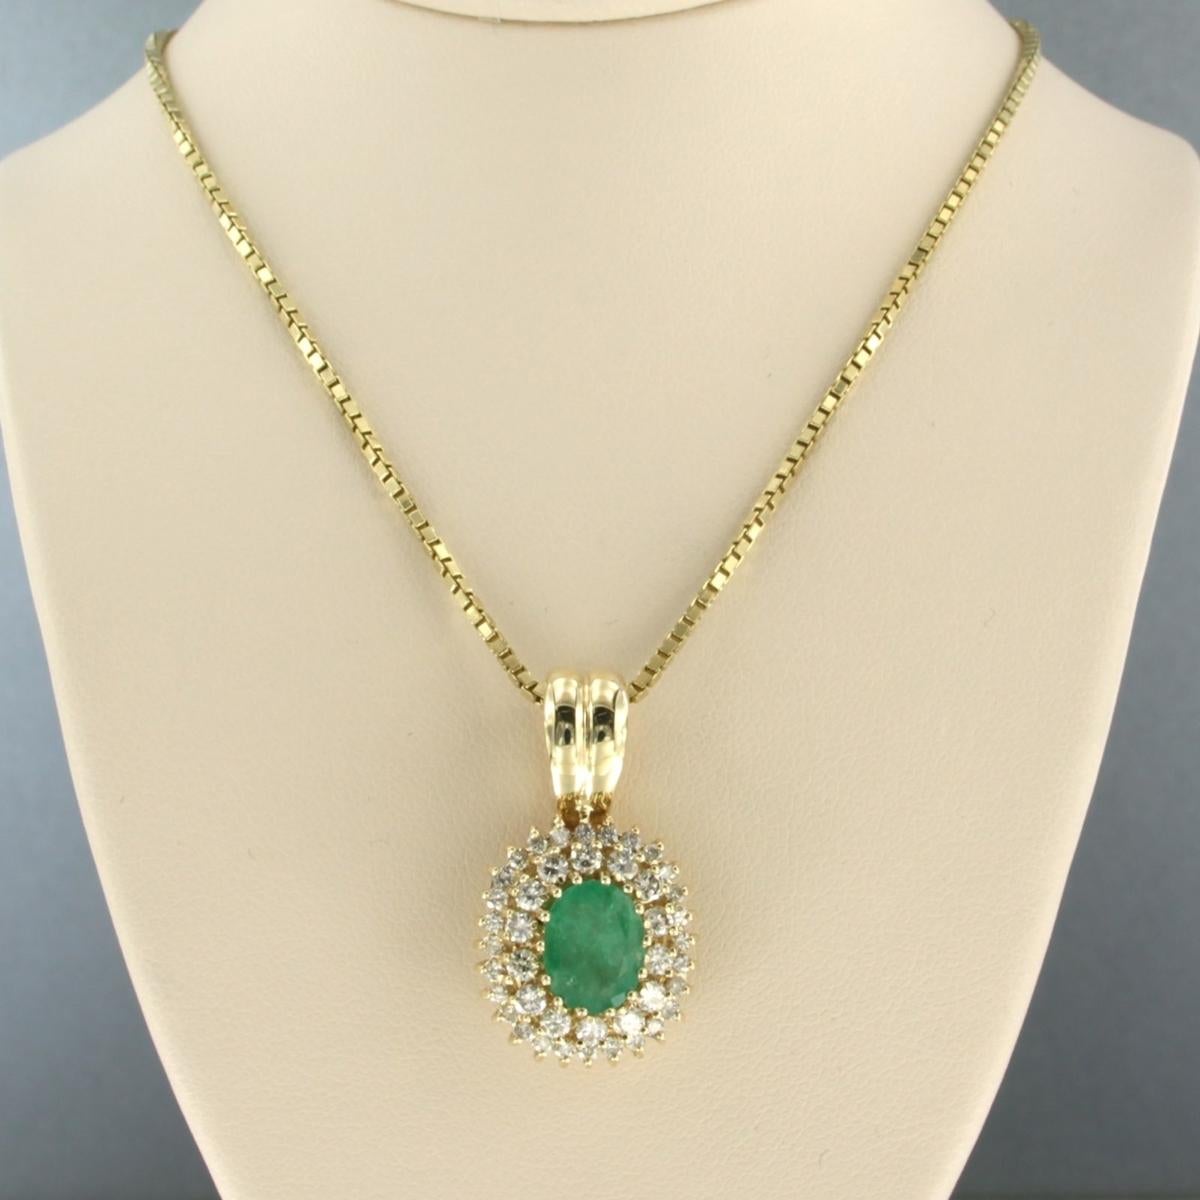 Emerald Diamond Gold Necklace Pendant

The necklace is 45 cm long (17.7 inch) and 1.3 mm wide (0.05 inch)
The pendant is approx. 2.8 cm heigh (1.1 inch) and 1.6 cm wide (0.6 inch)
Total weight is 12.3 grams (0.4 oz)

Set with

Sapphire

- 1 x 9.2 mm